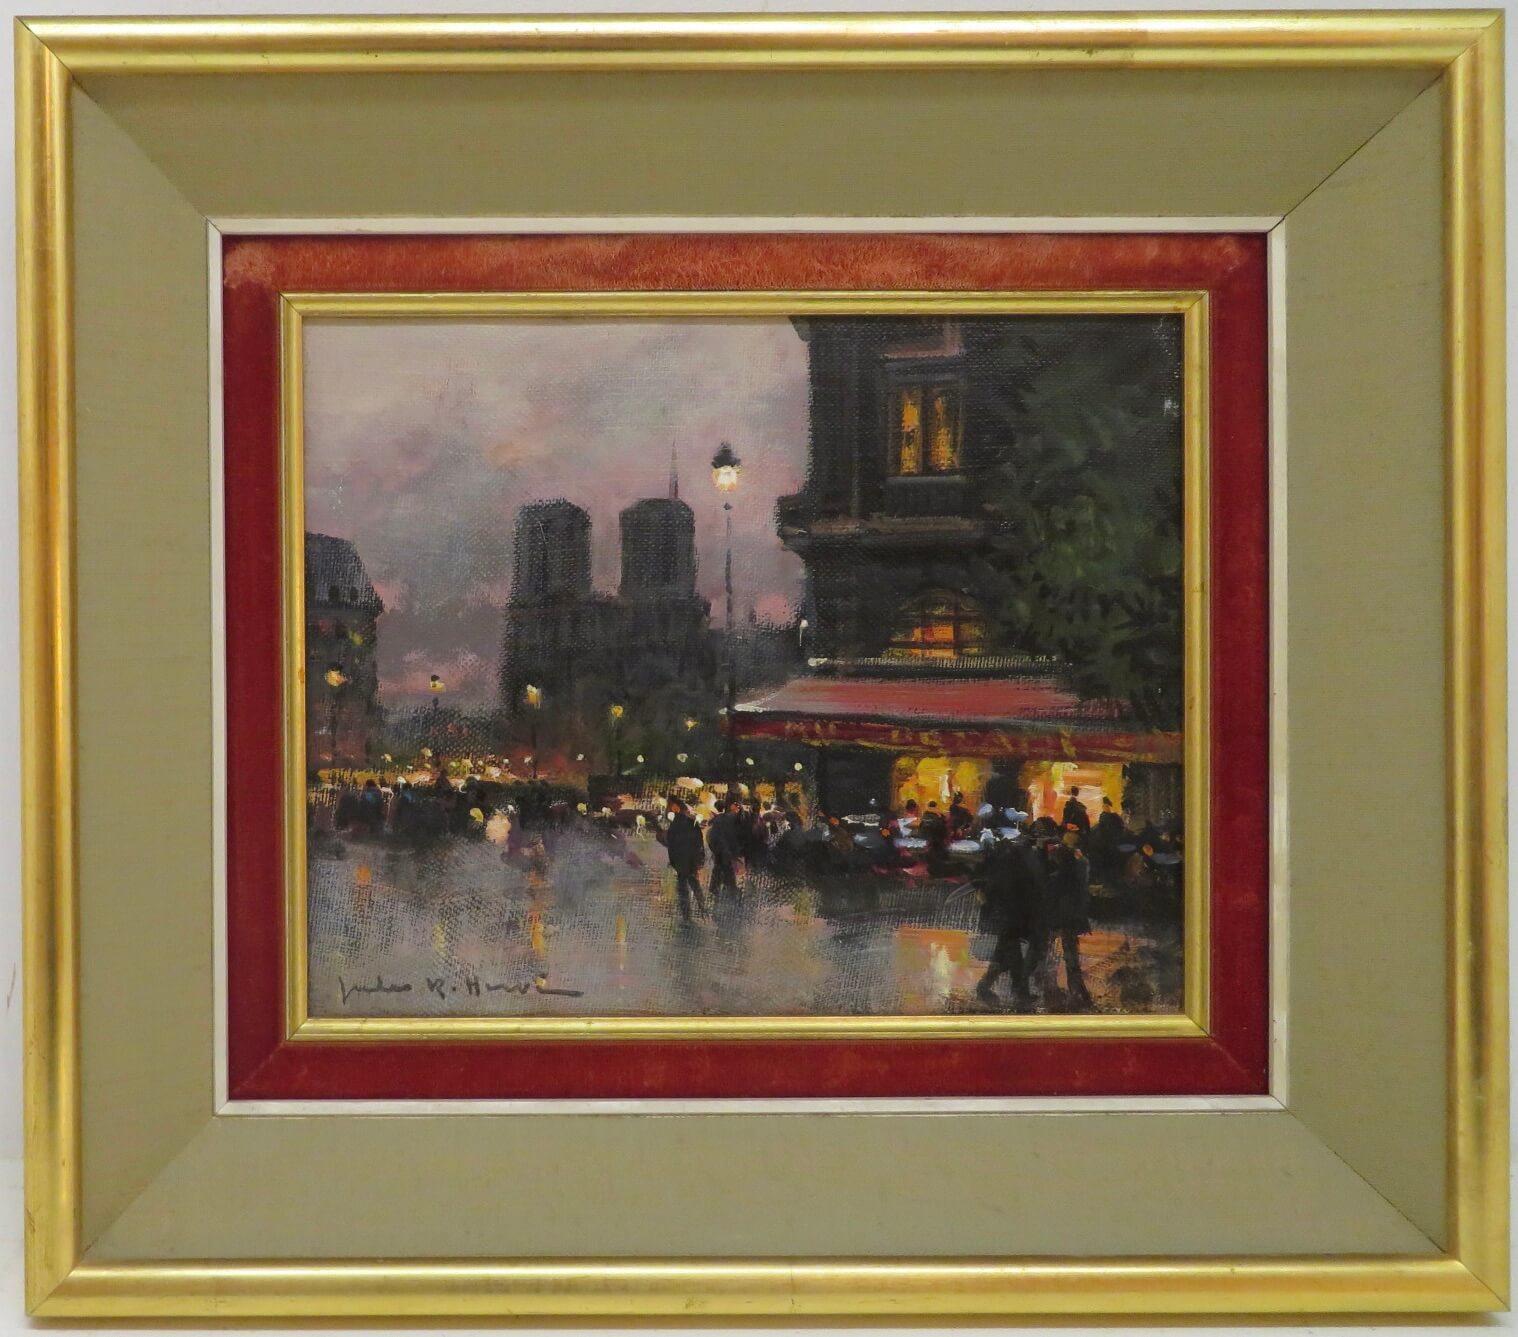 ARTIST: Jules Rene Herve (1887-1981) French

TITLE: “Maxims De Paris Restaurant At Night”

SIGNED: lower right

MEDIUM: oil on canvas

SIZE: 41cm x 36cm inc frame

CONDITION: very good

DETAIL: Herve began his formal art studies in an evening school